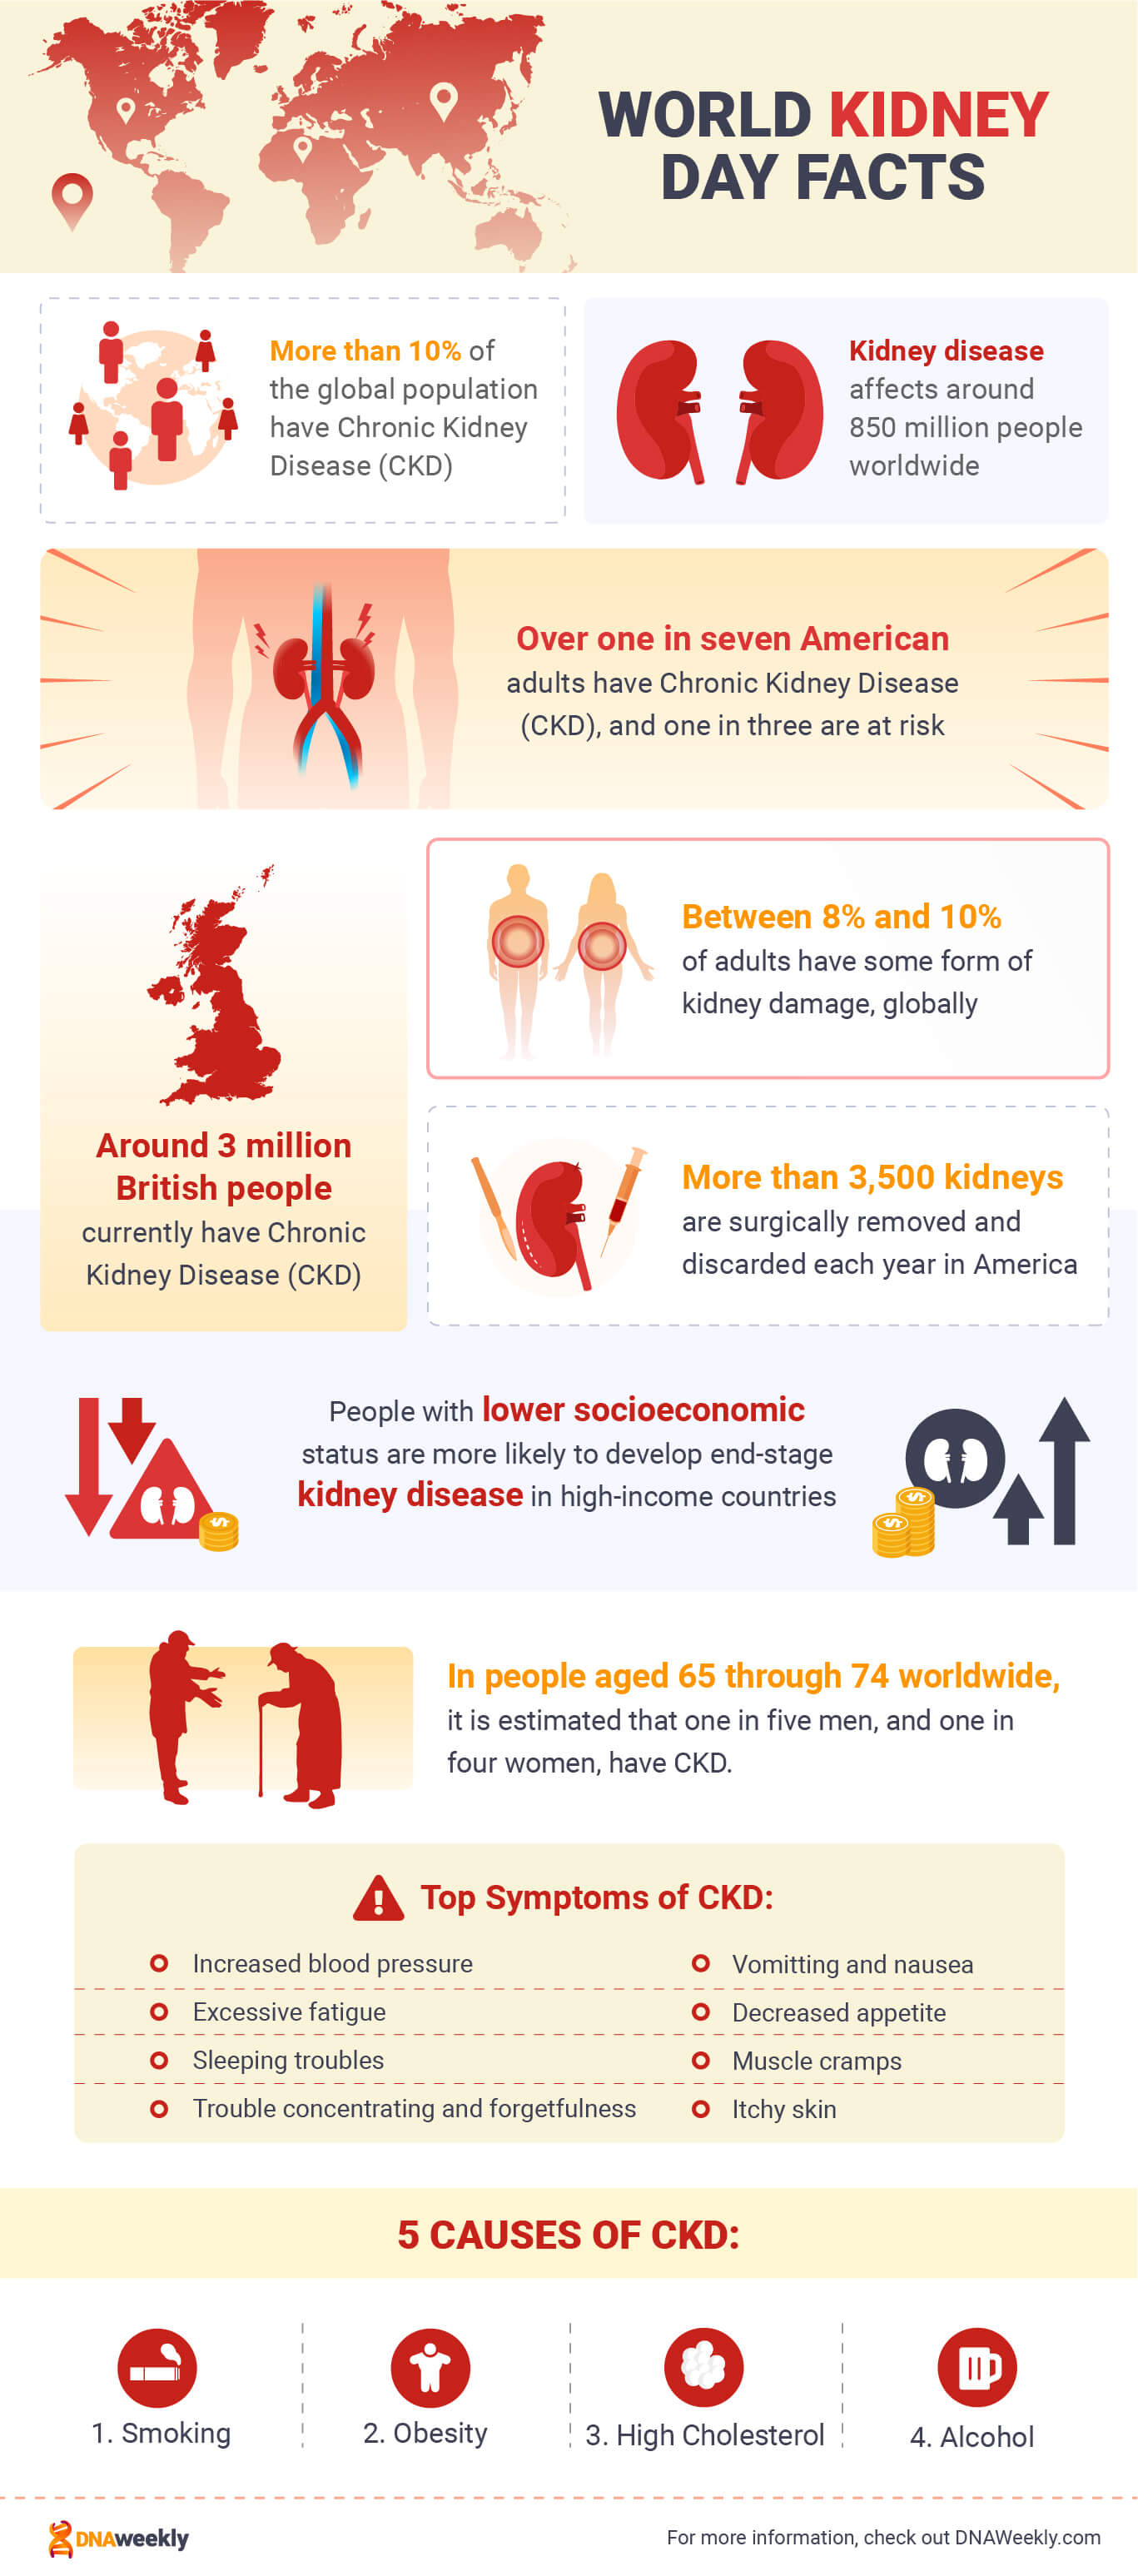 World Kidney Day Facts